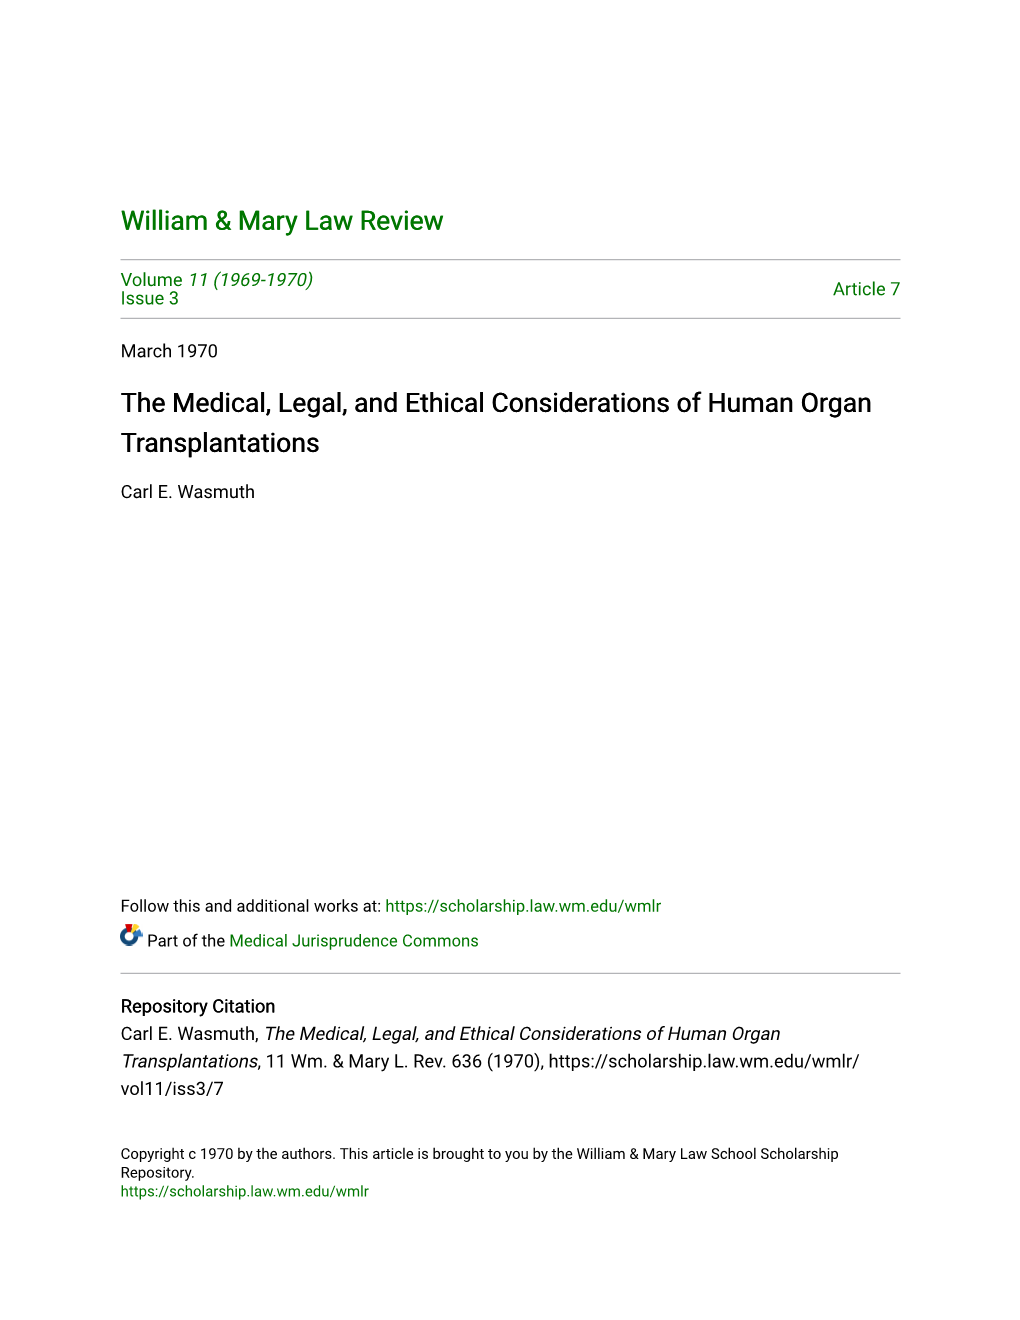 The Medical, Legal, and Ethical Considerations of Human Organ Transplantations